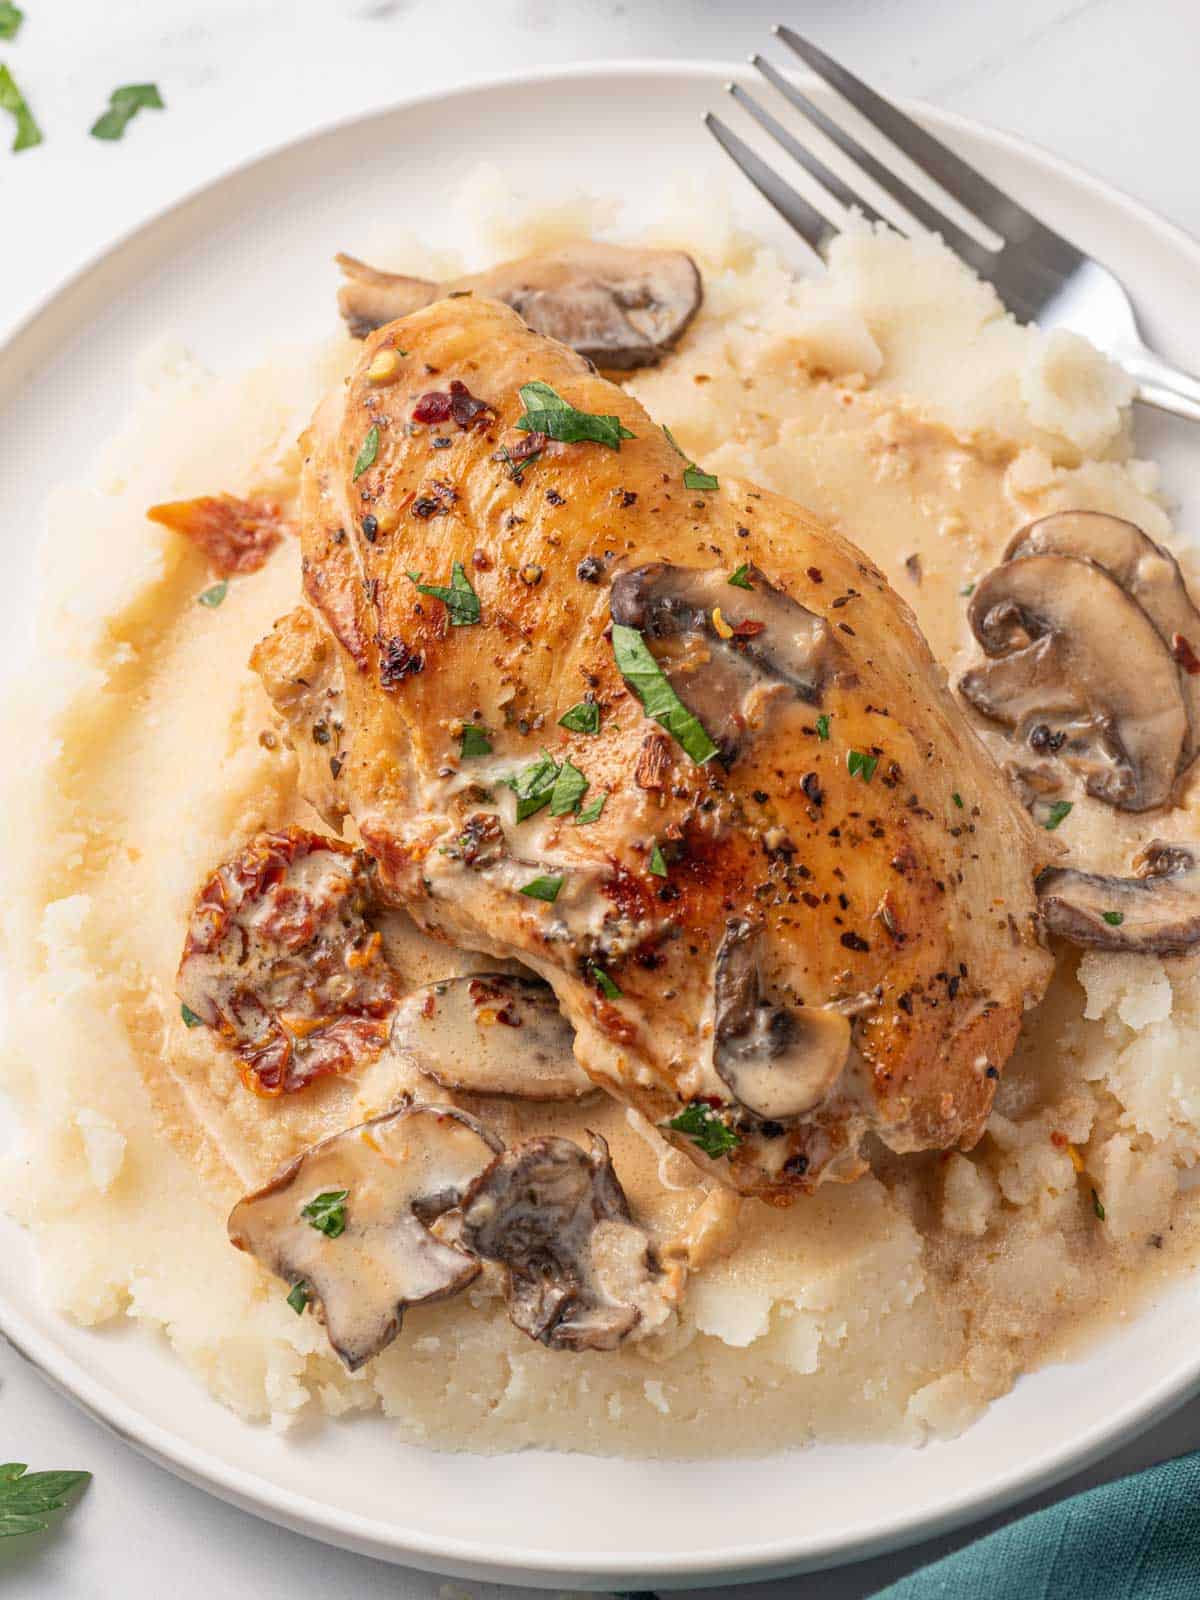 Sundried tomato filling oozes out of the chicken marsala.